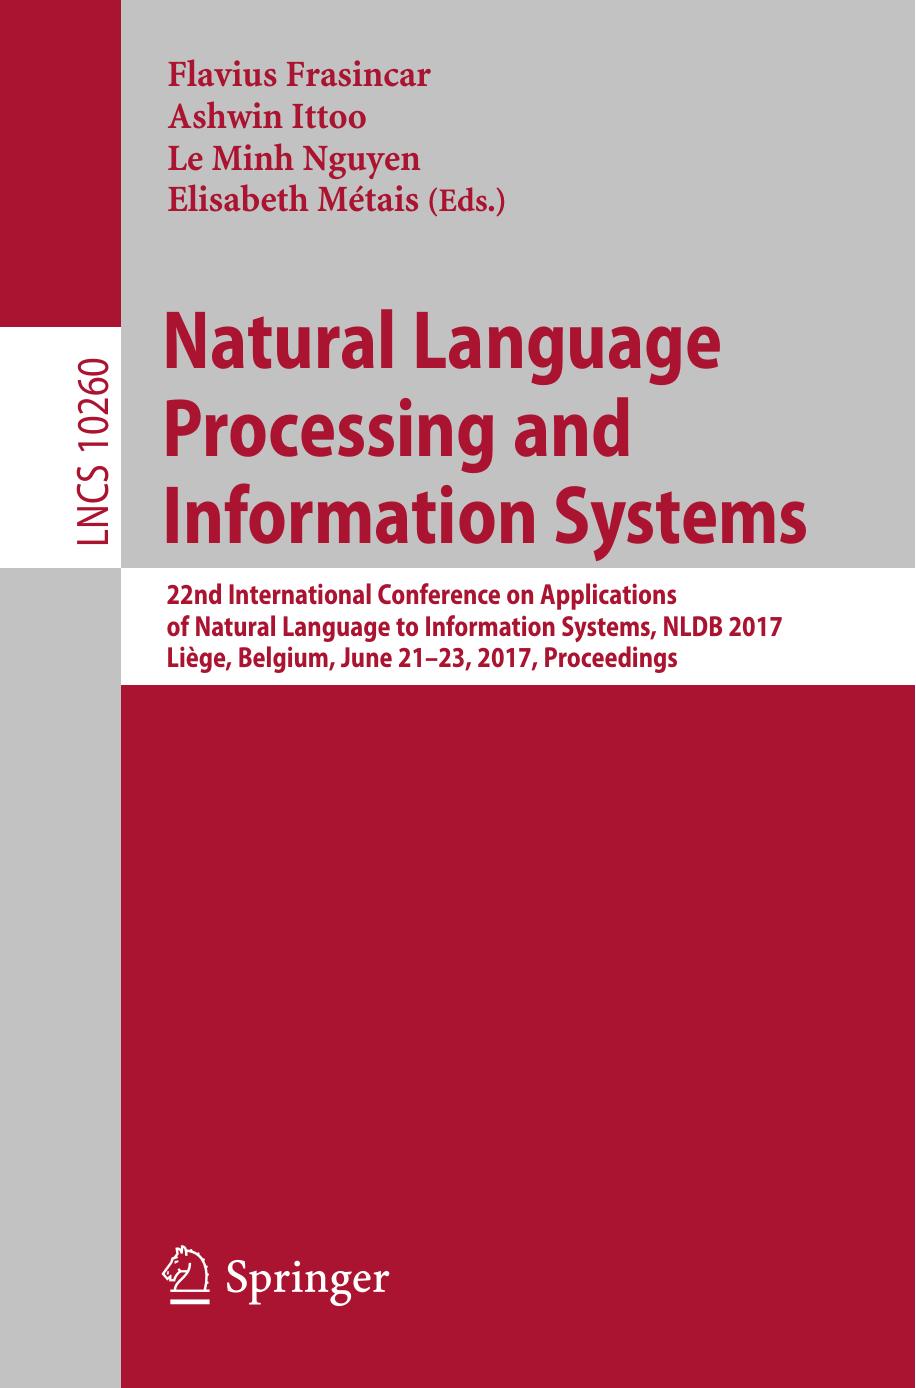 Natural Language Processing and Information Systems: 22nd International Conference on Applications of Natural Language to Information Systems, NLDB 2017, Liège, Belgium, June 21-23, 2017, Proceedings